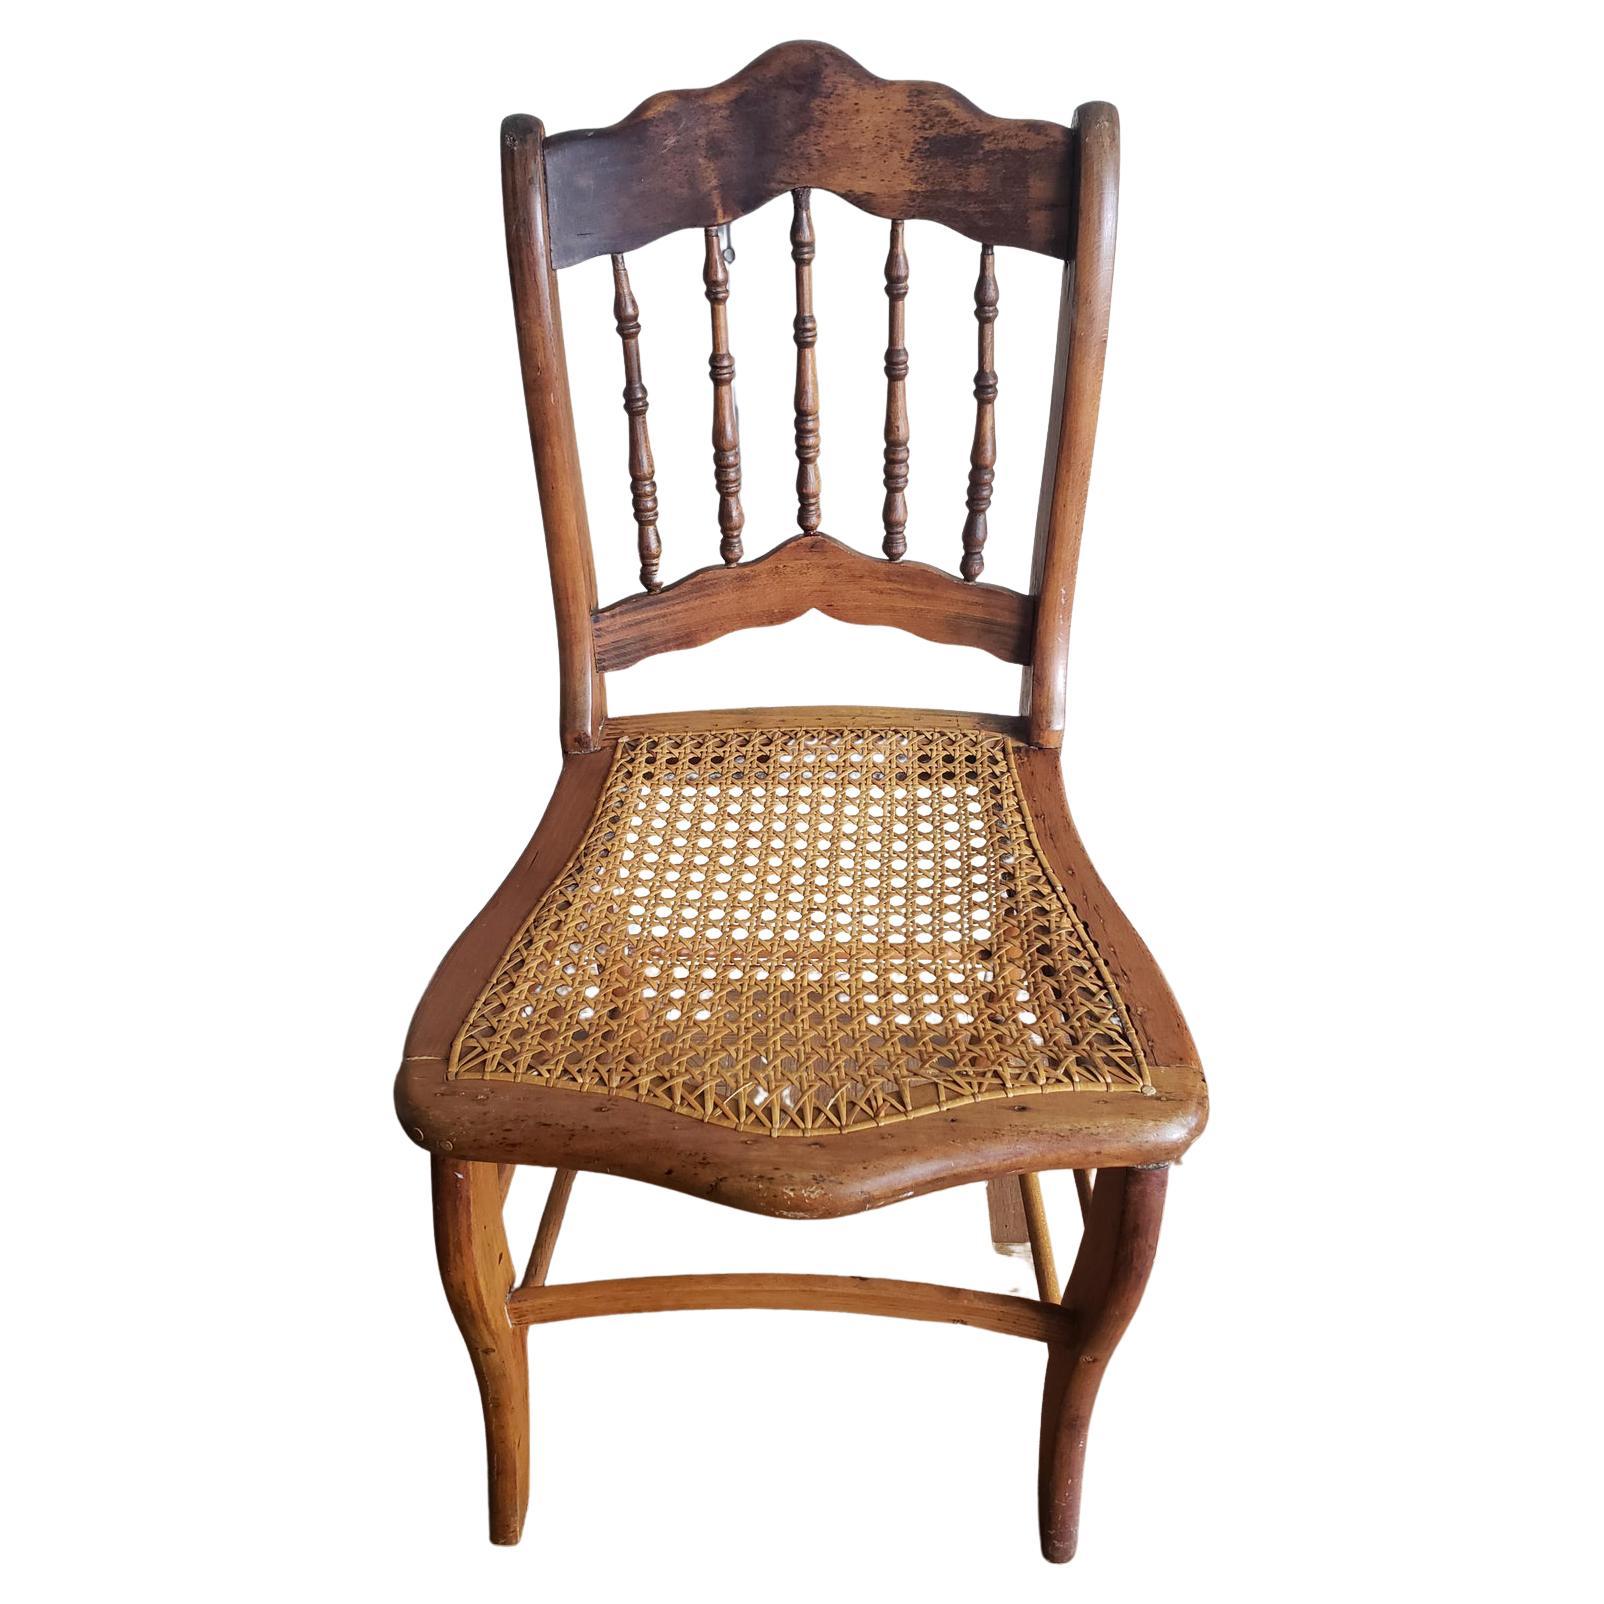 Civil War Era solid maple caned seat chair. Caning in good condition.. Vintage Solid Wood, Cane Seat Dining Side Accent Chair. truly antique furniture with 5 spindle back. One of the spindles appears to have been nicely repaired.

Measures 17